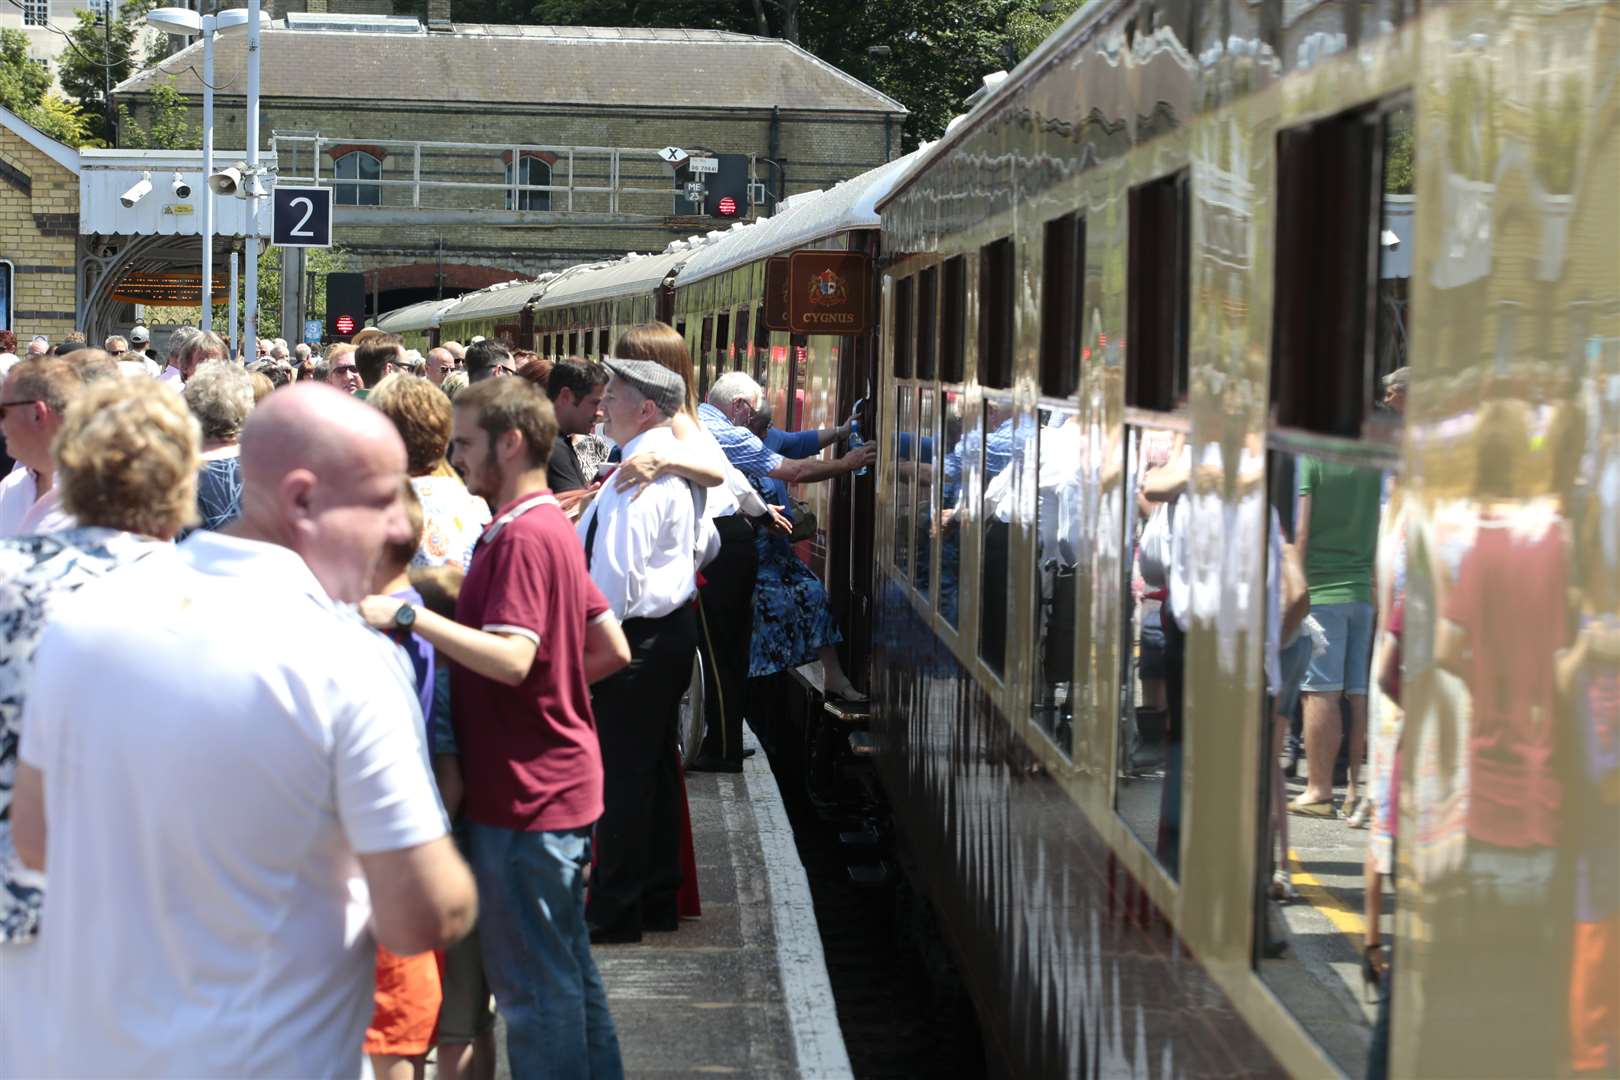 The train at Maidstone East railway station